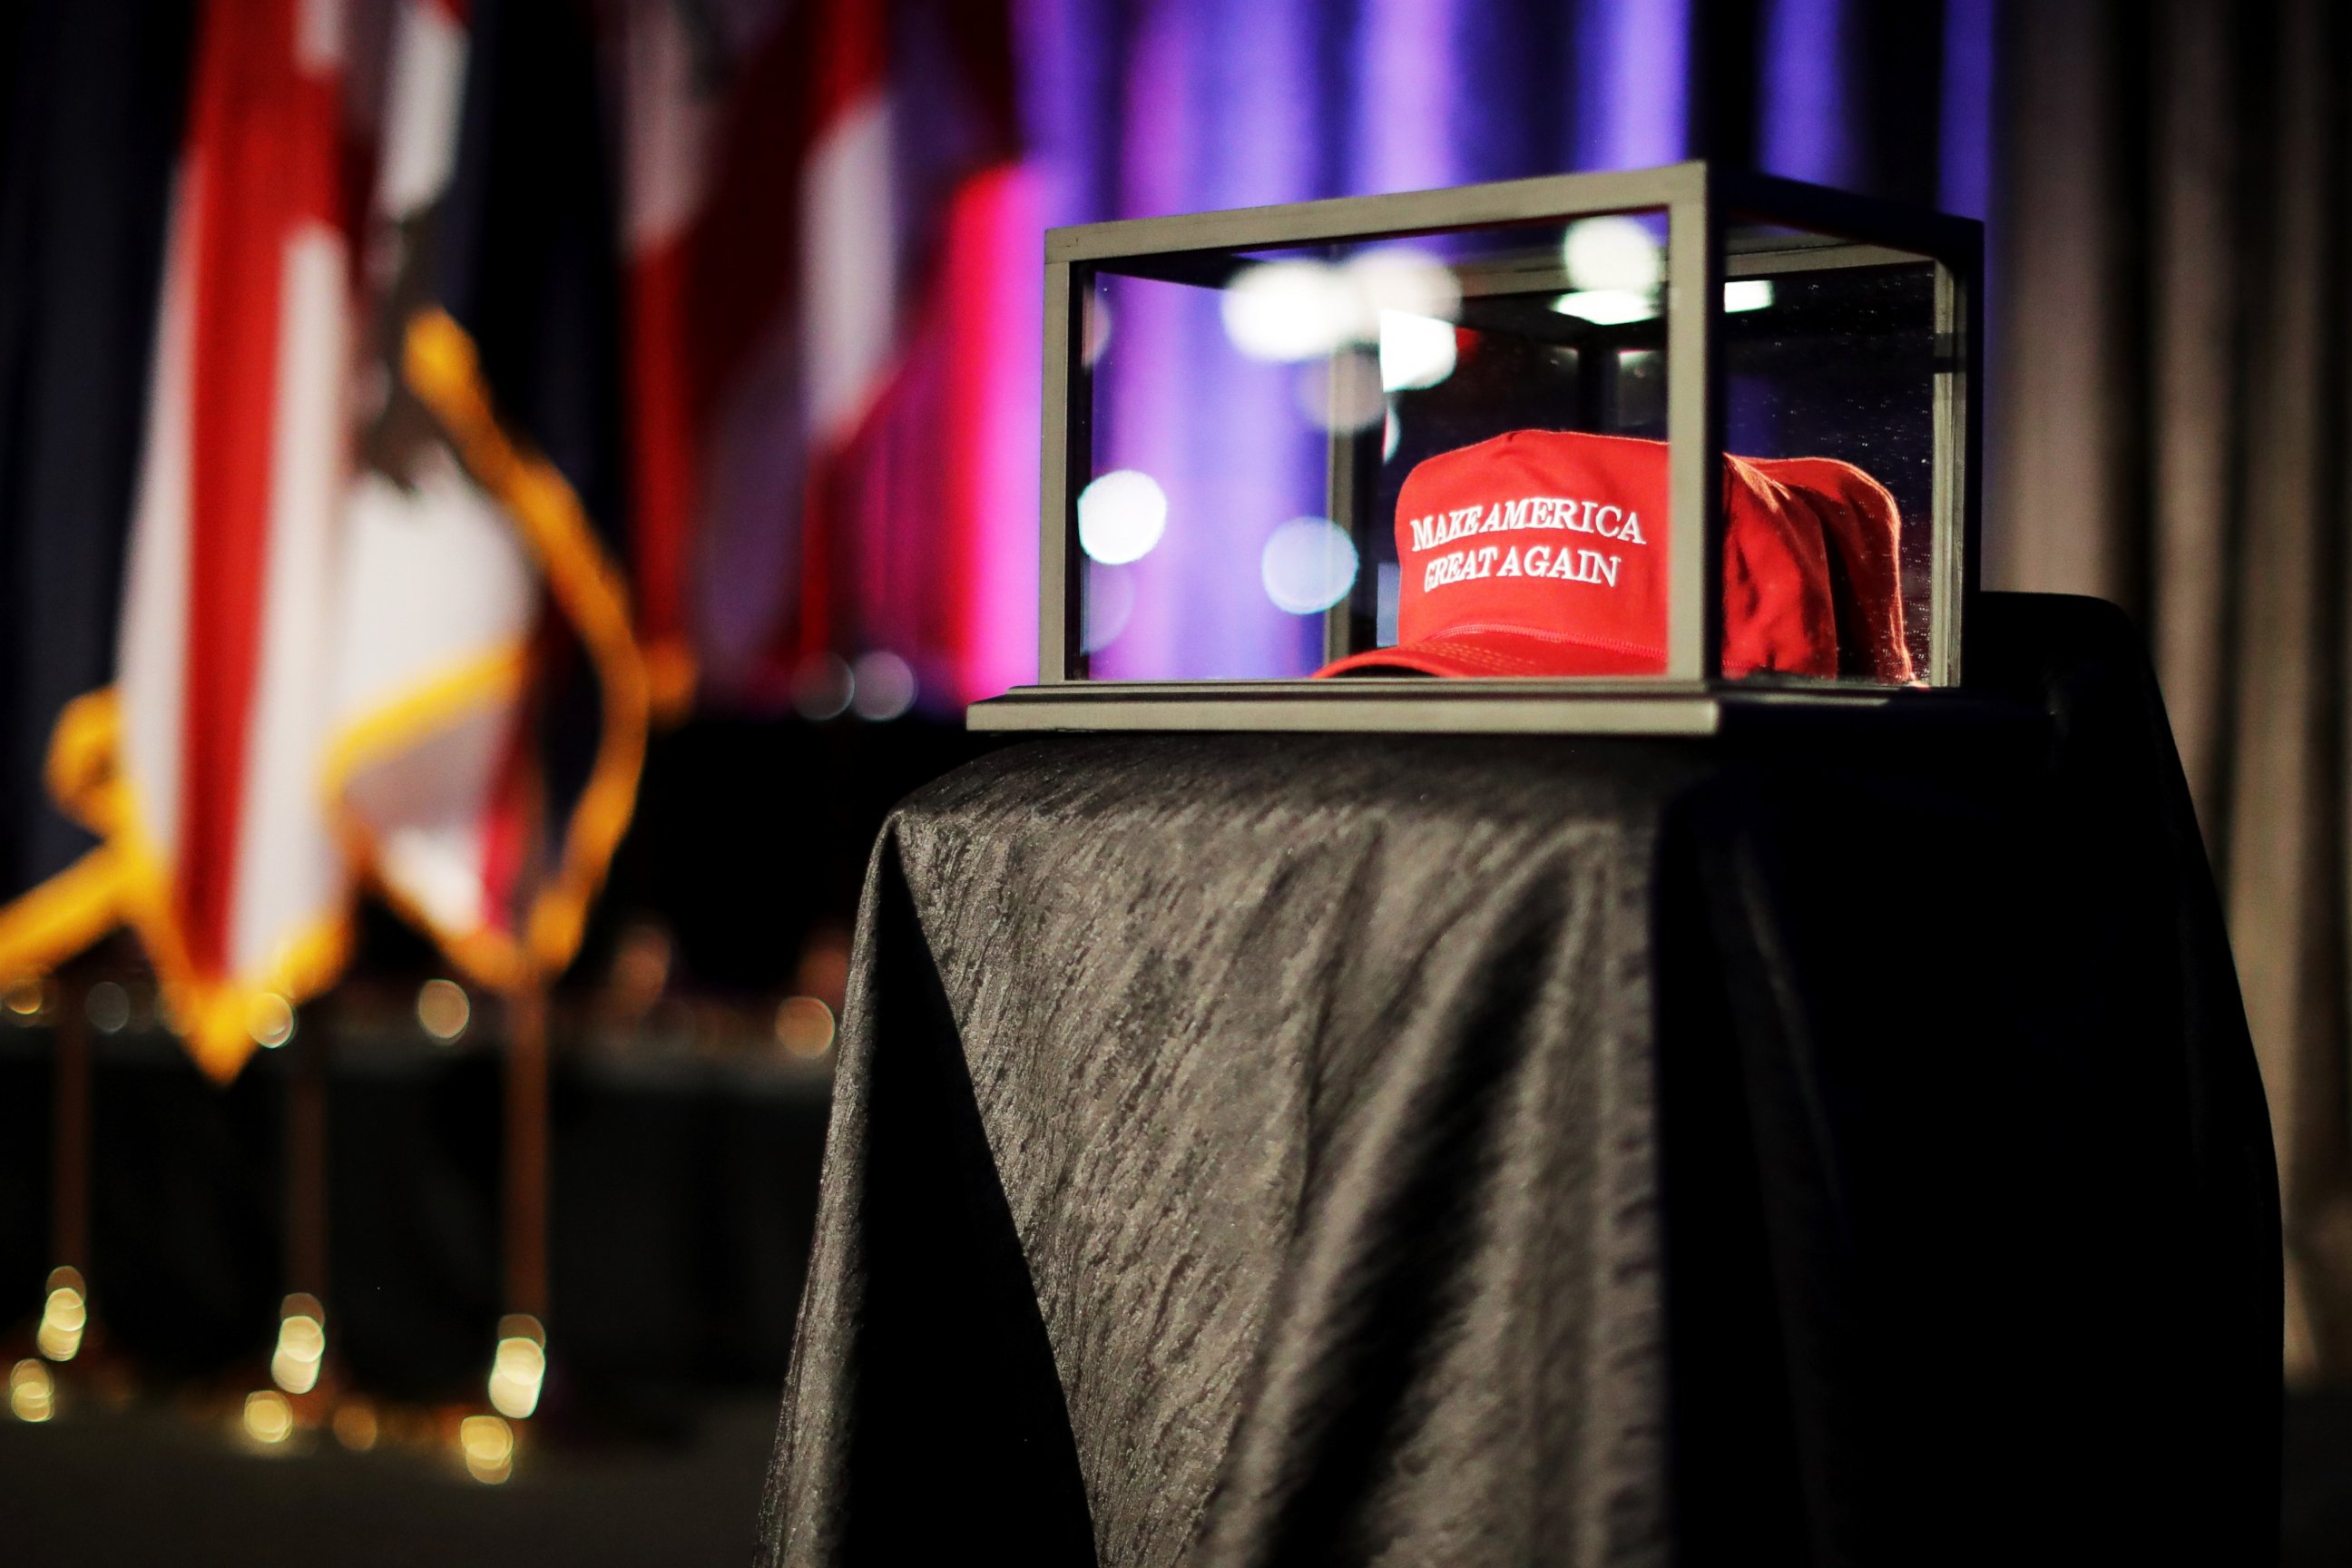 PHOTO: A "Make America Great Again" hat sits in a glass case during Republican presidential nominee Donald Trump's election night party at the New York Hilton Midtown, Nov. 8, 2016 in New York City.